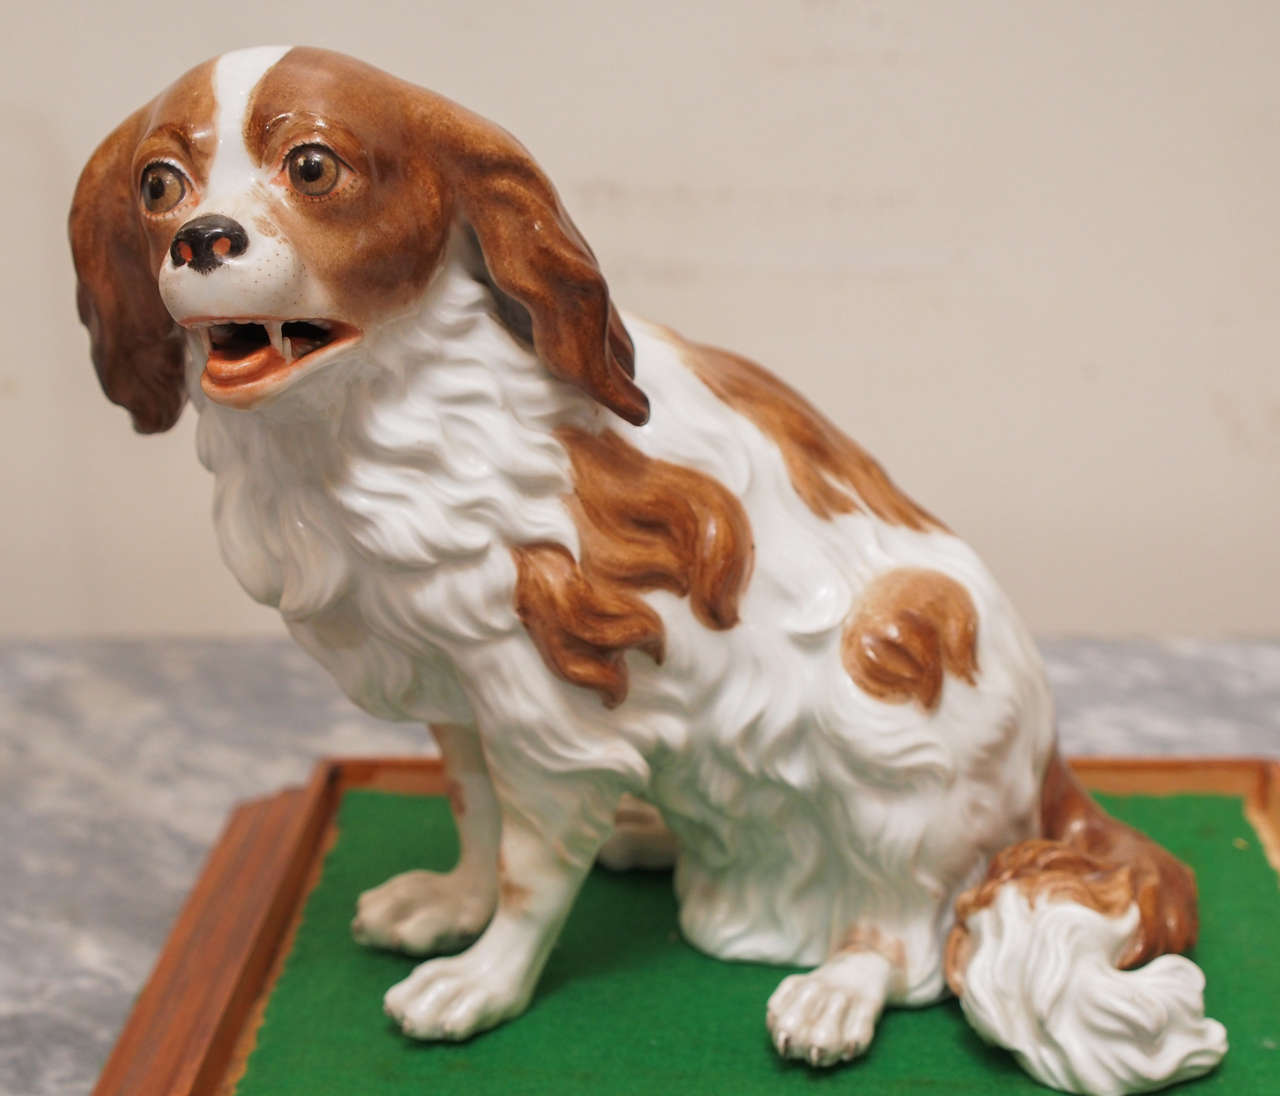 Vienna Porcelain figure of Cavalier King Charles Spaniel with beehive mark now ensconced in a custom glass and copper box with a wooden base.